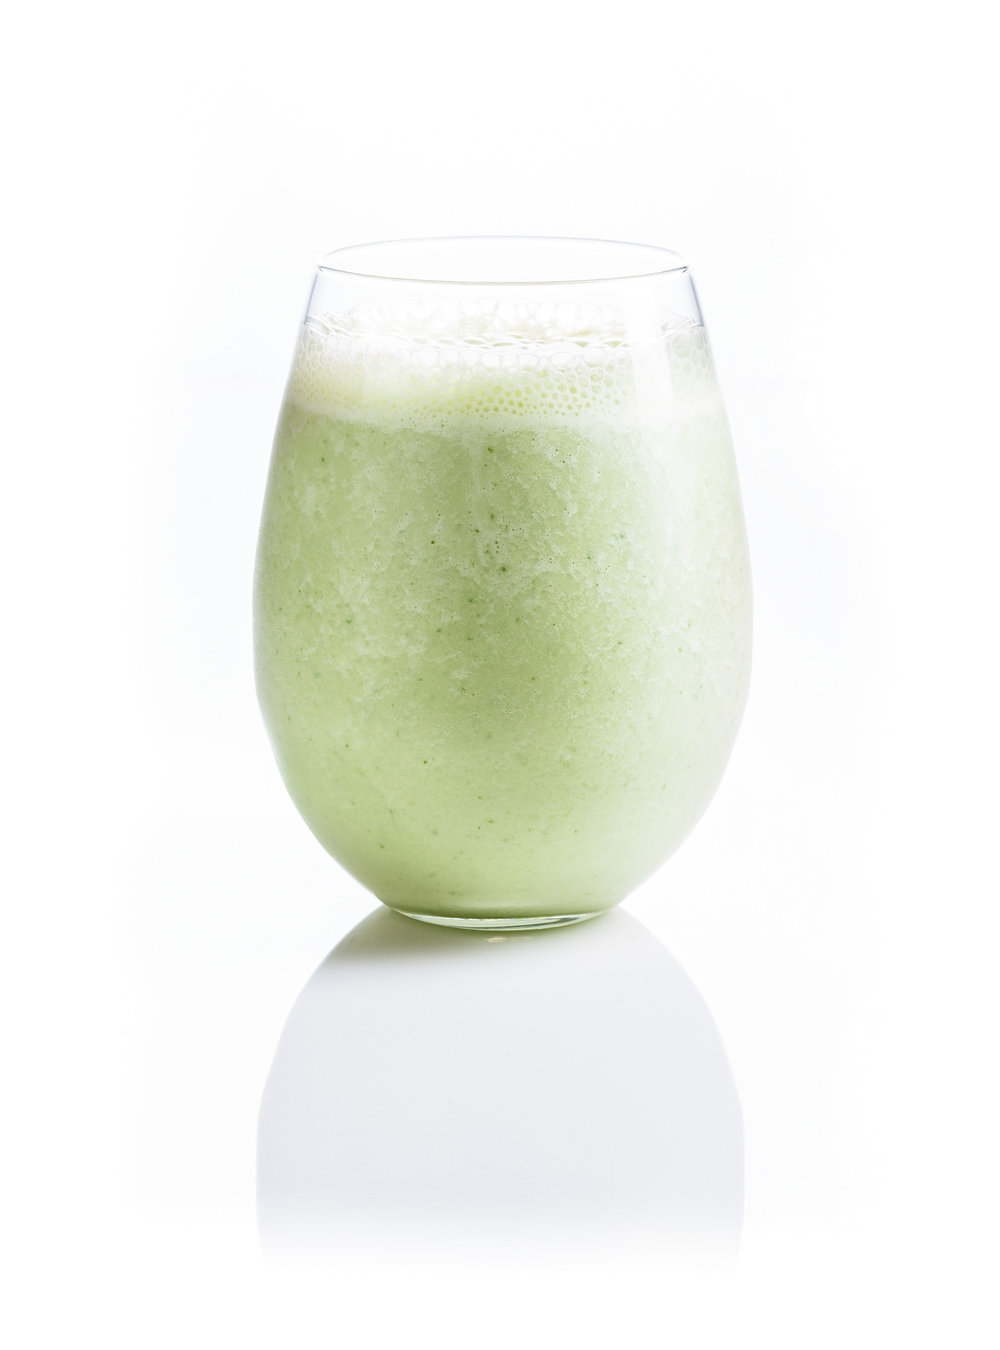 Cucumber and Pineapple Smoothie